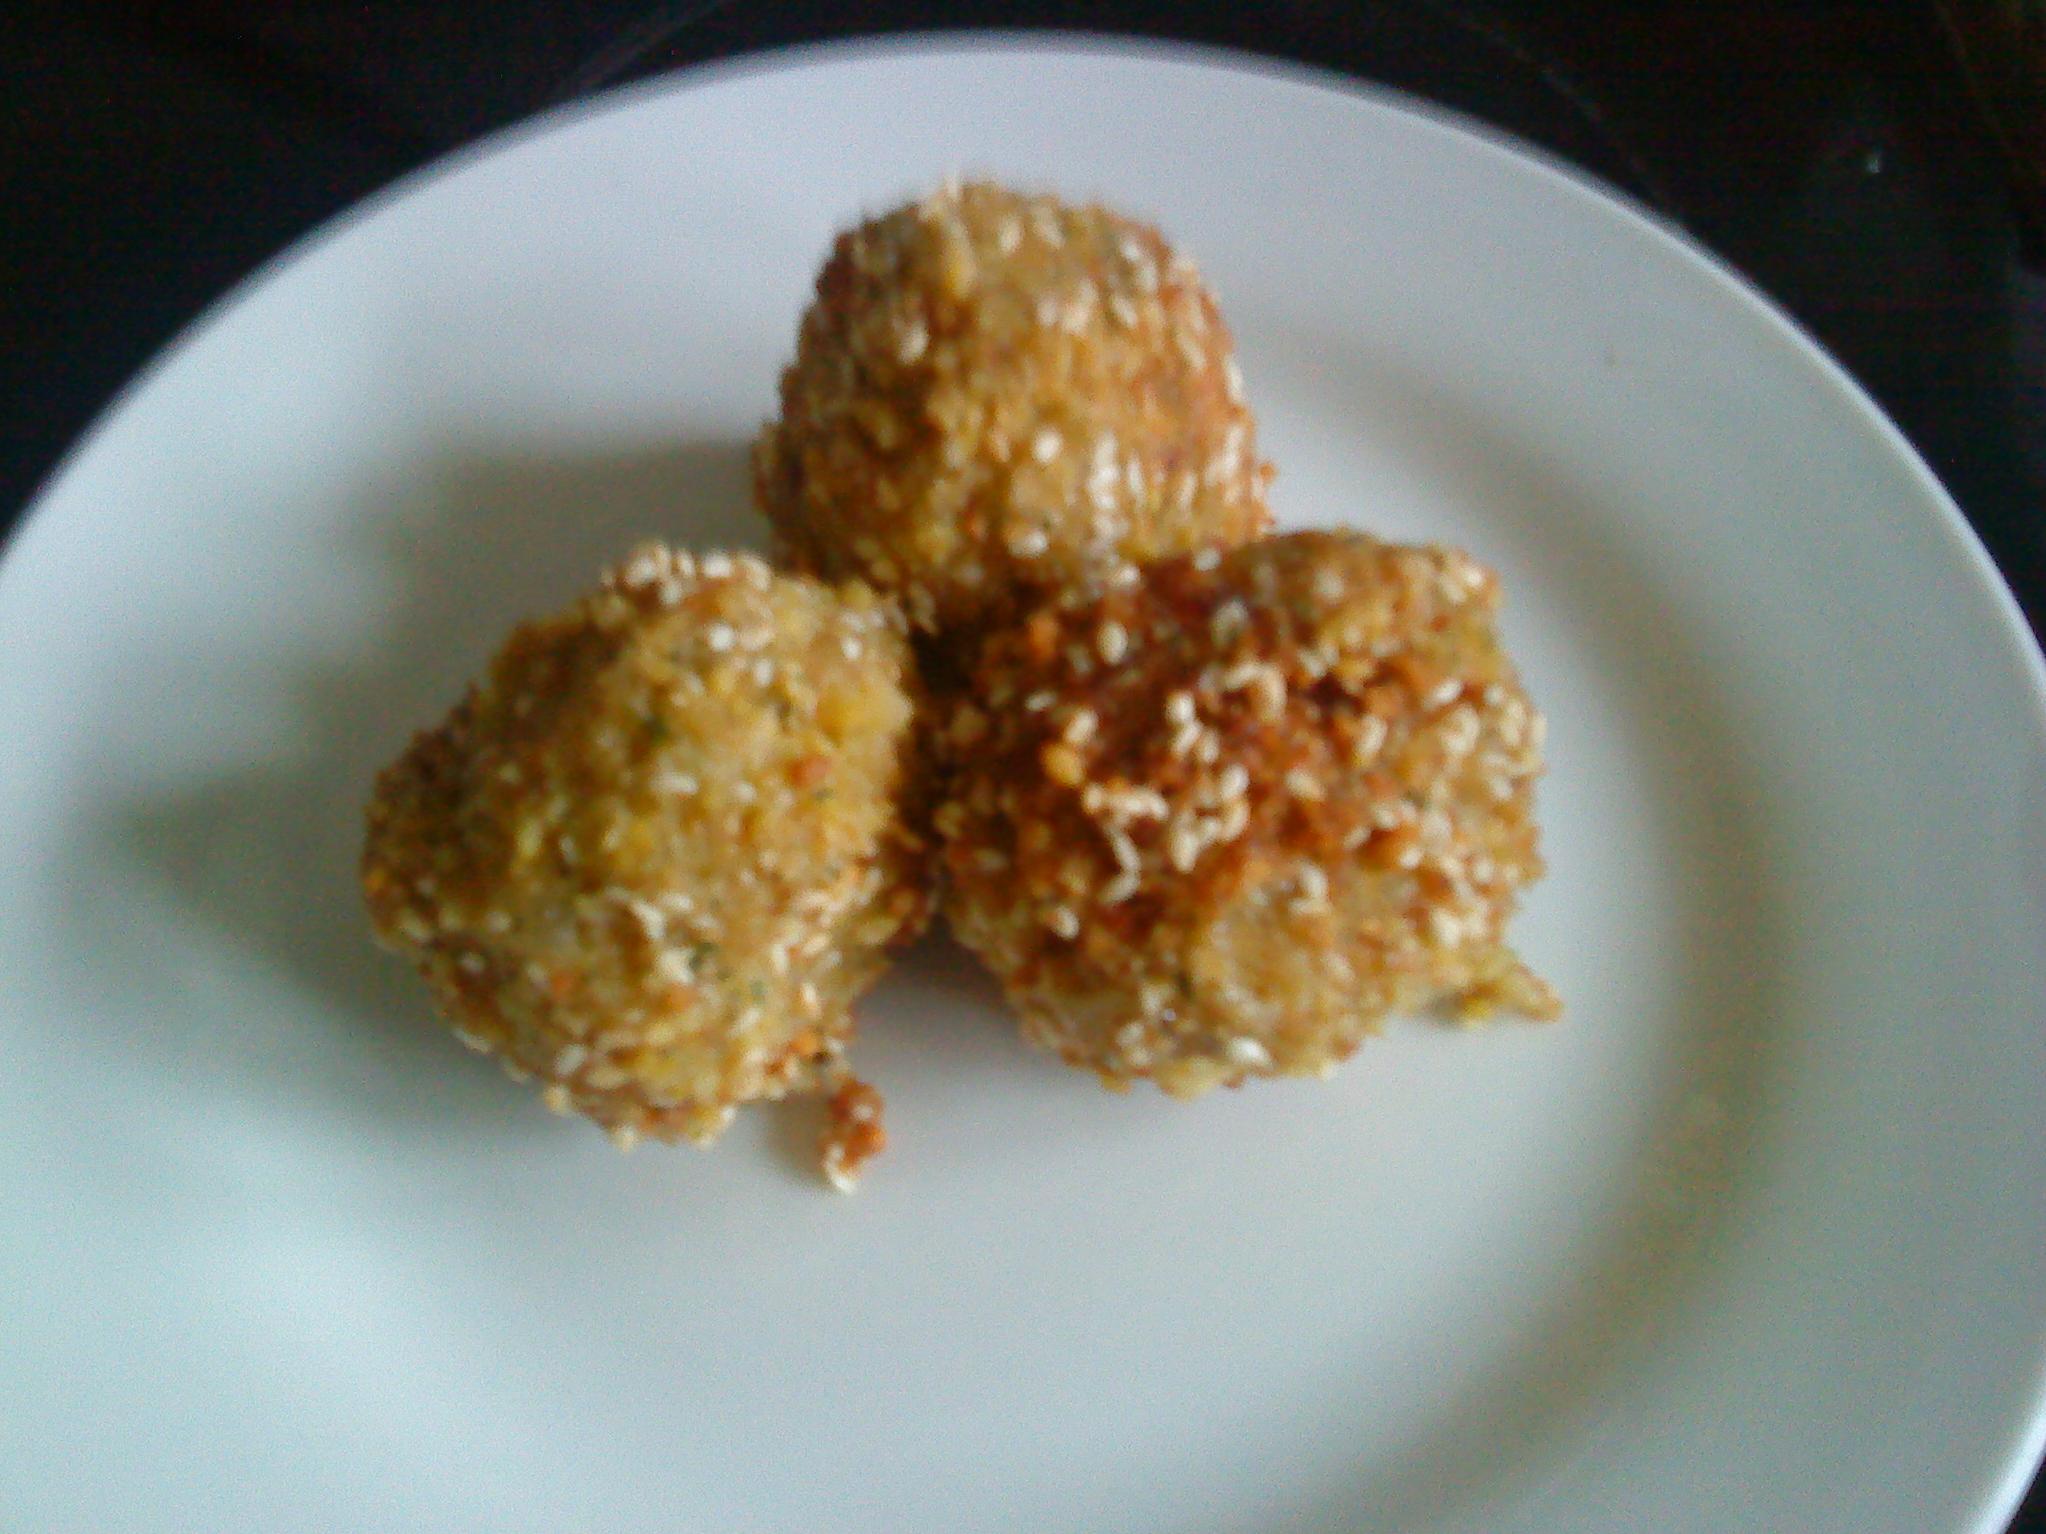  Indulge in these healthy and nutritious balls of goodness.